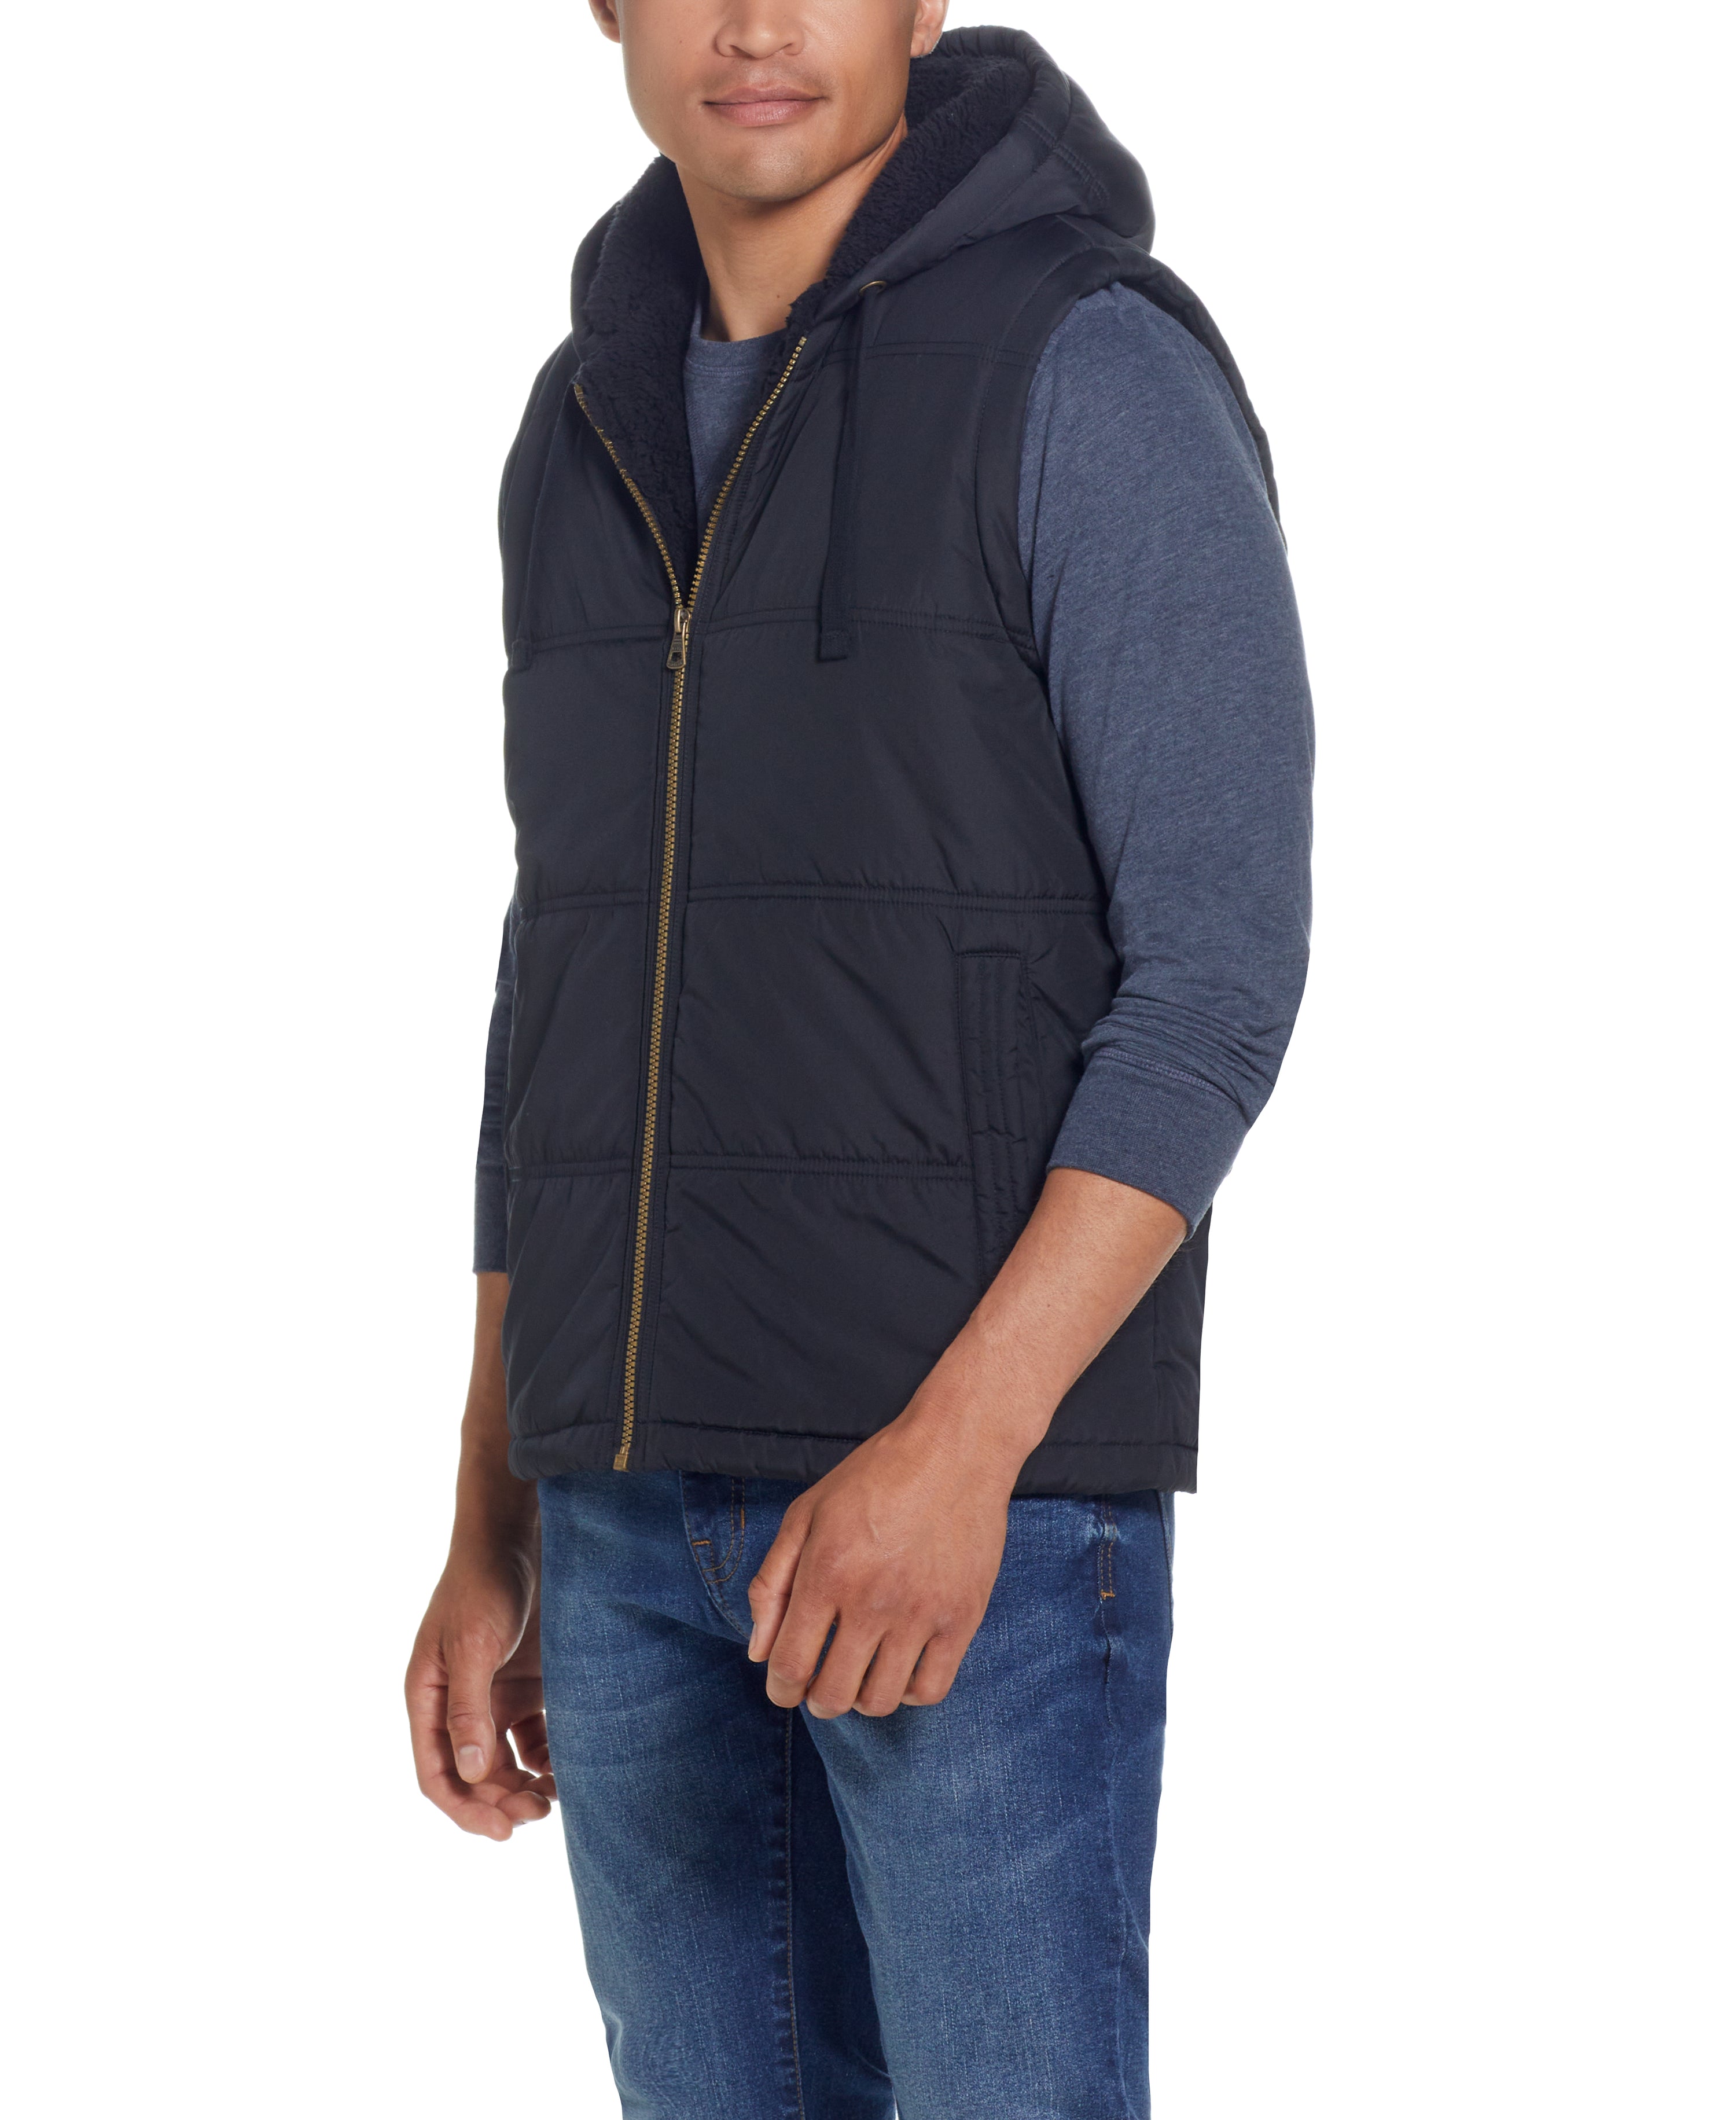 SHERPA LINED HOODED PUFFER VEST in BLACK